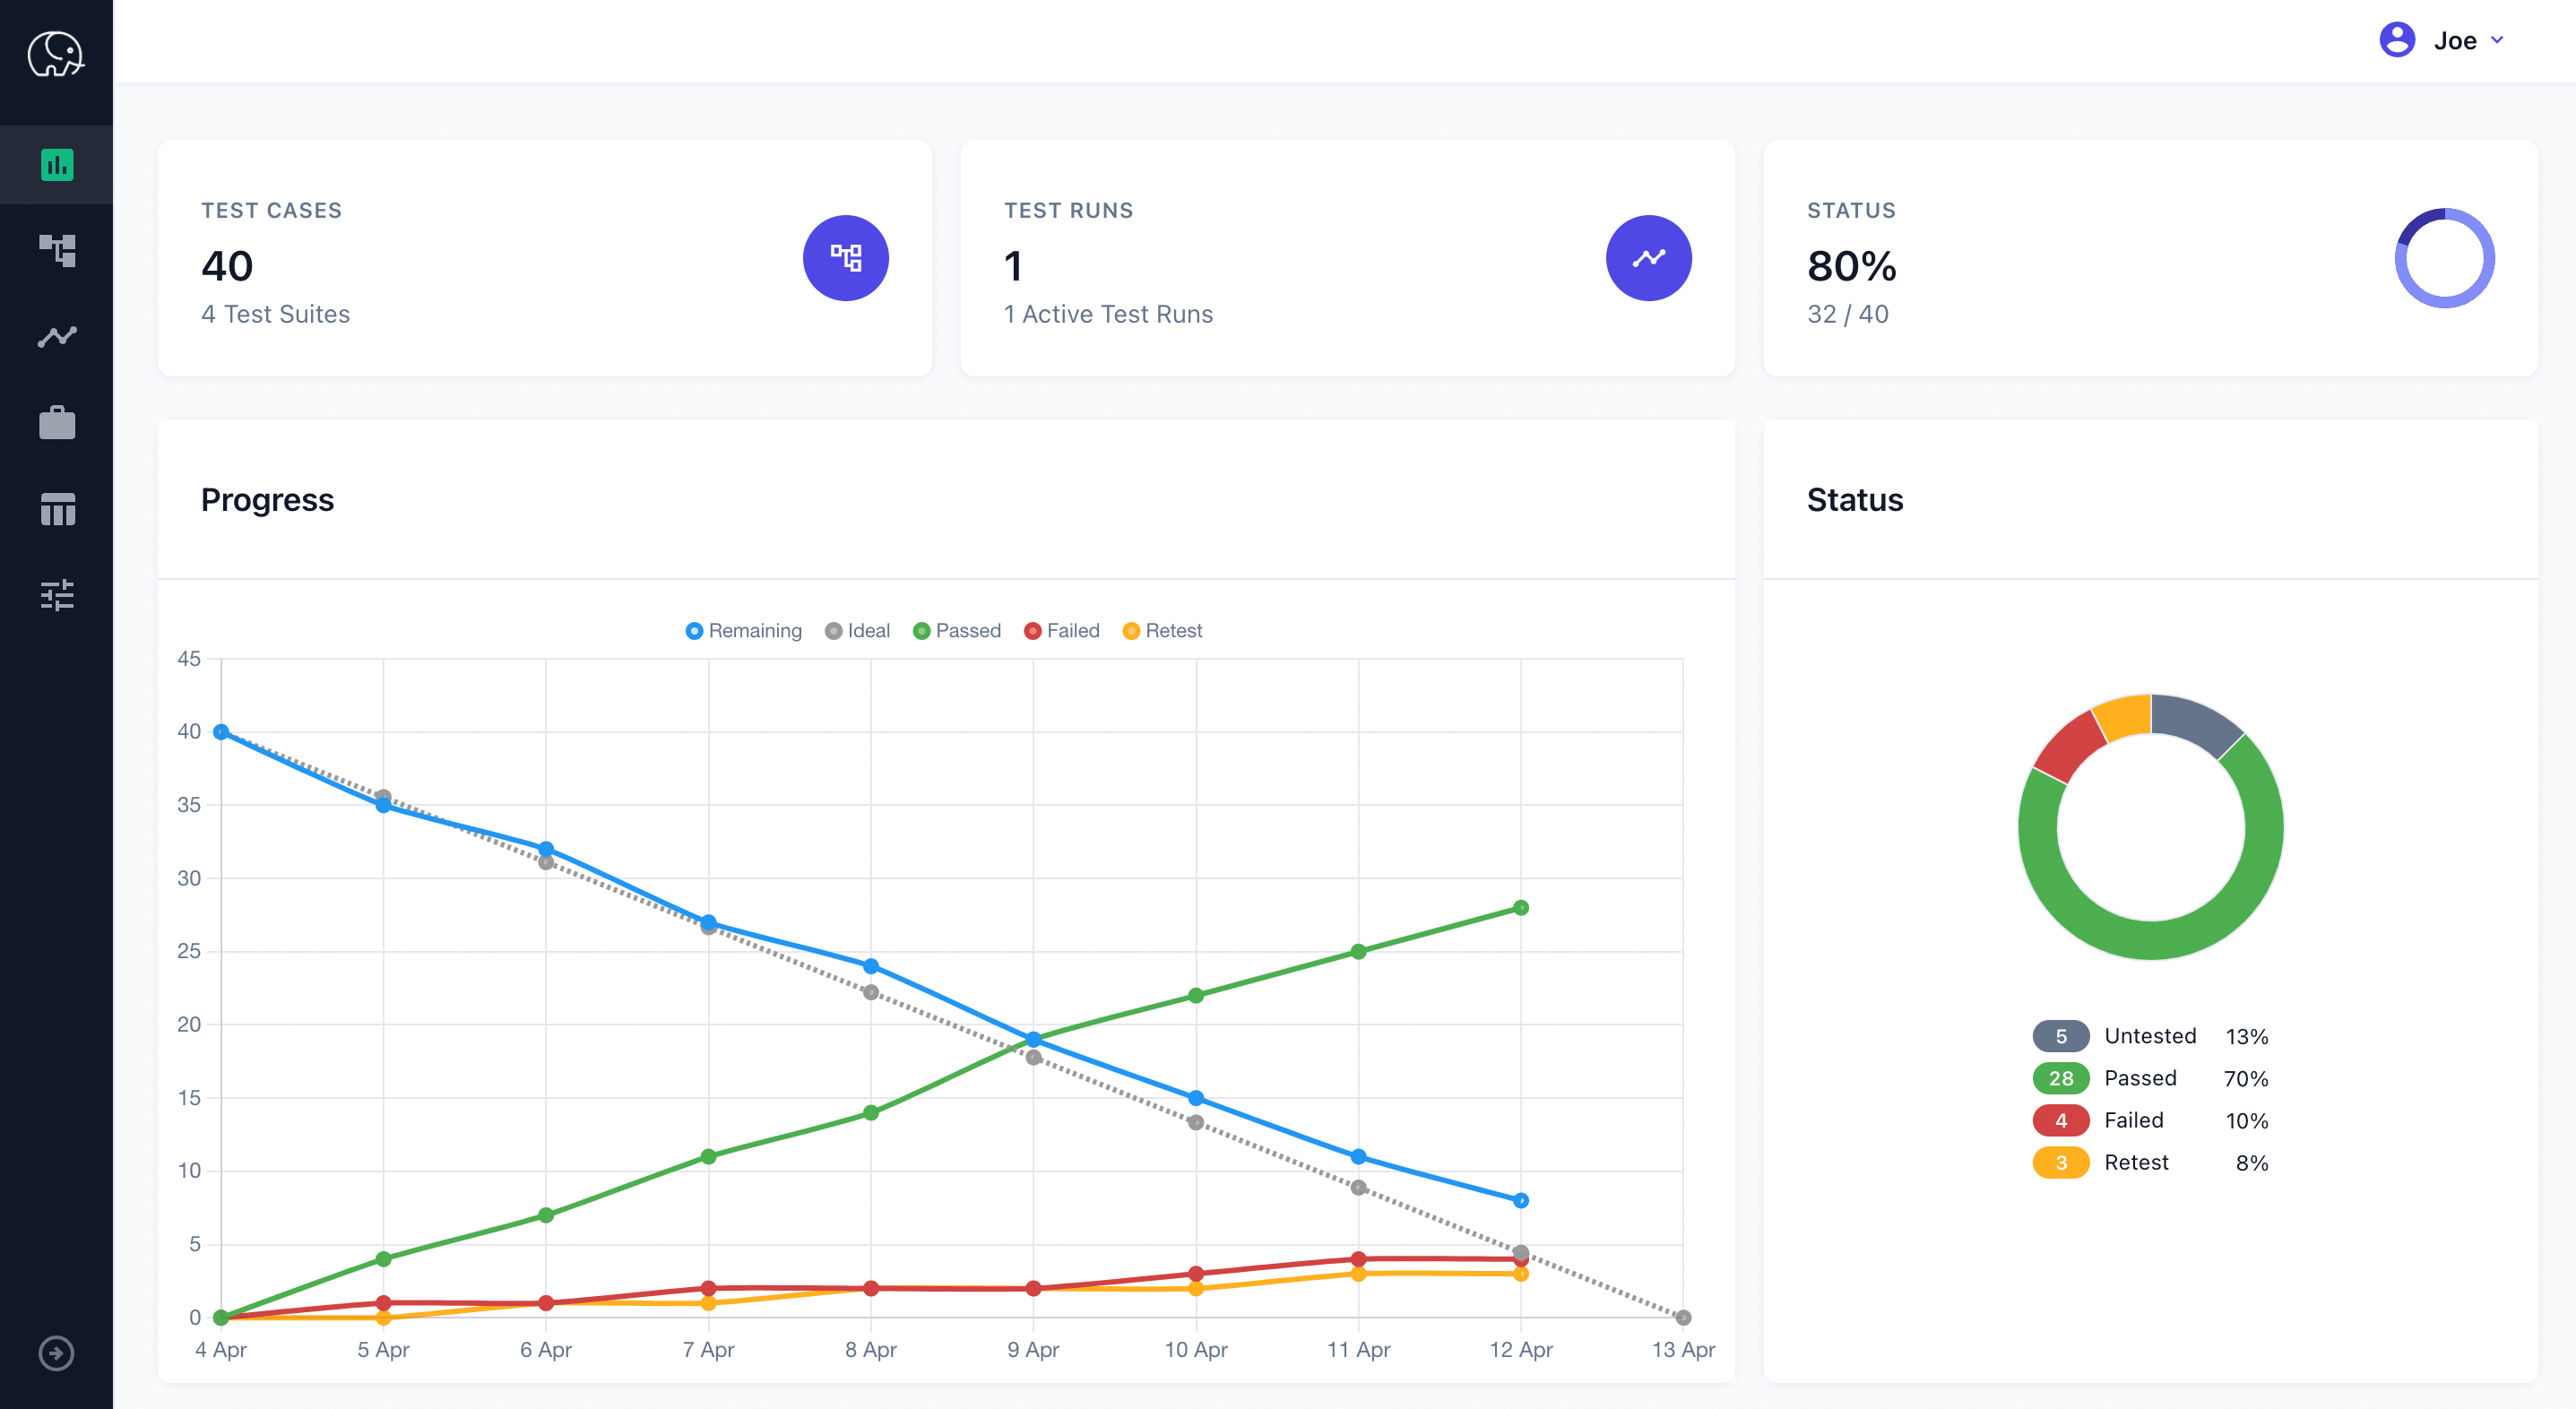 Visually monitoring charts helps you track progress at a glance, with unique burndown charts, interactive dashboards, and an activity stream, all designed to keep you informed about the latest activities and progress of a test run or project.